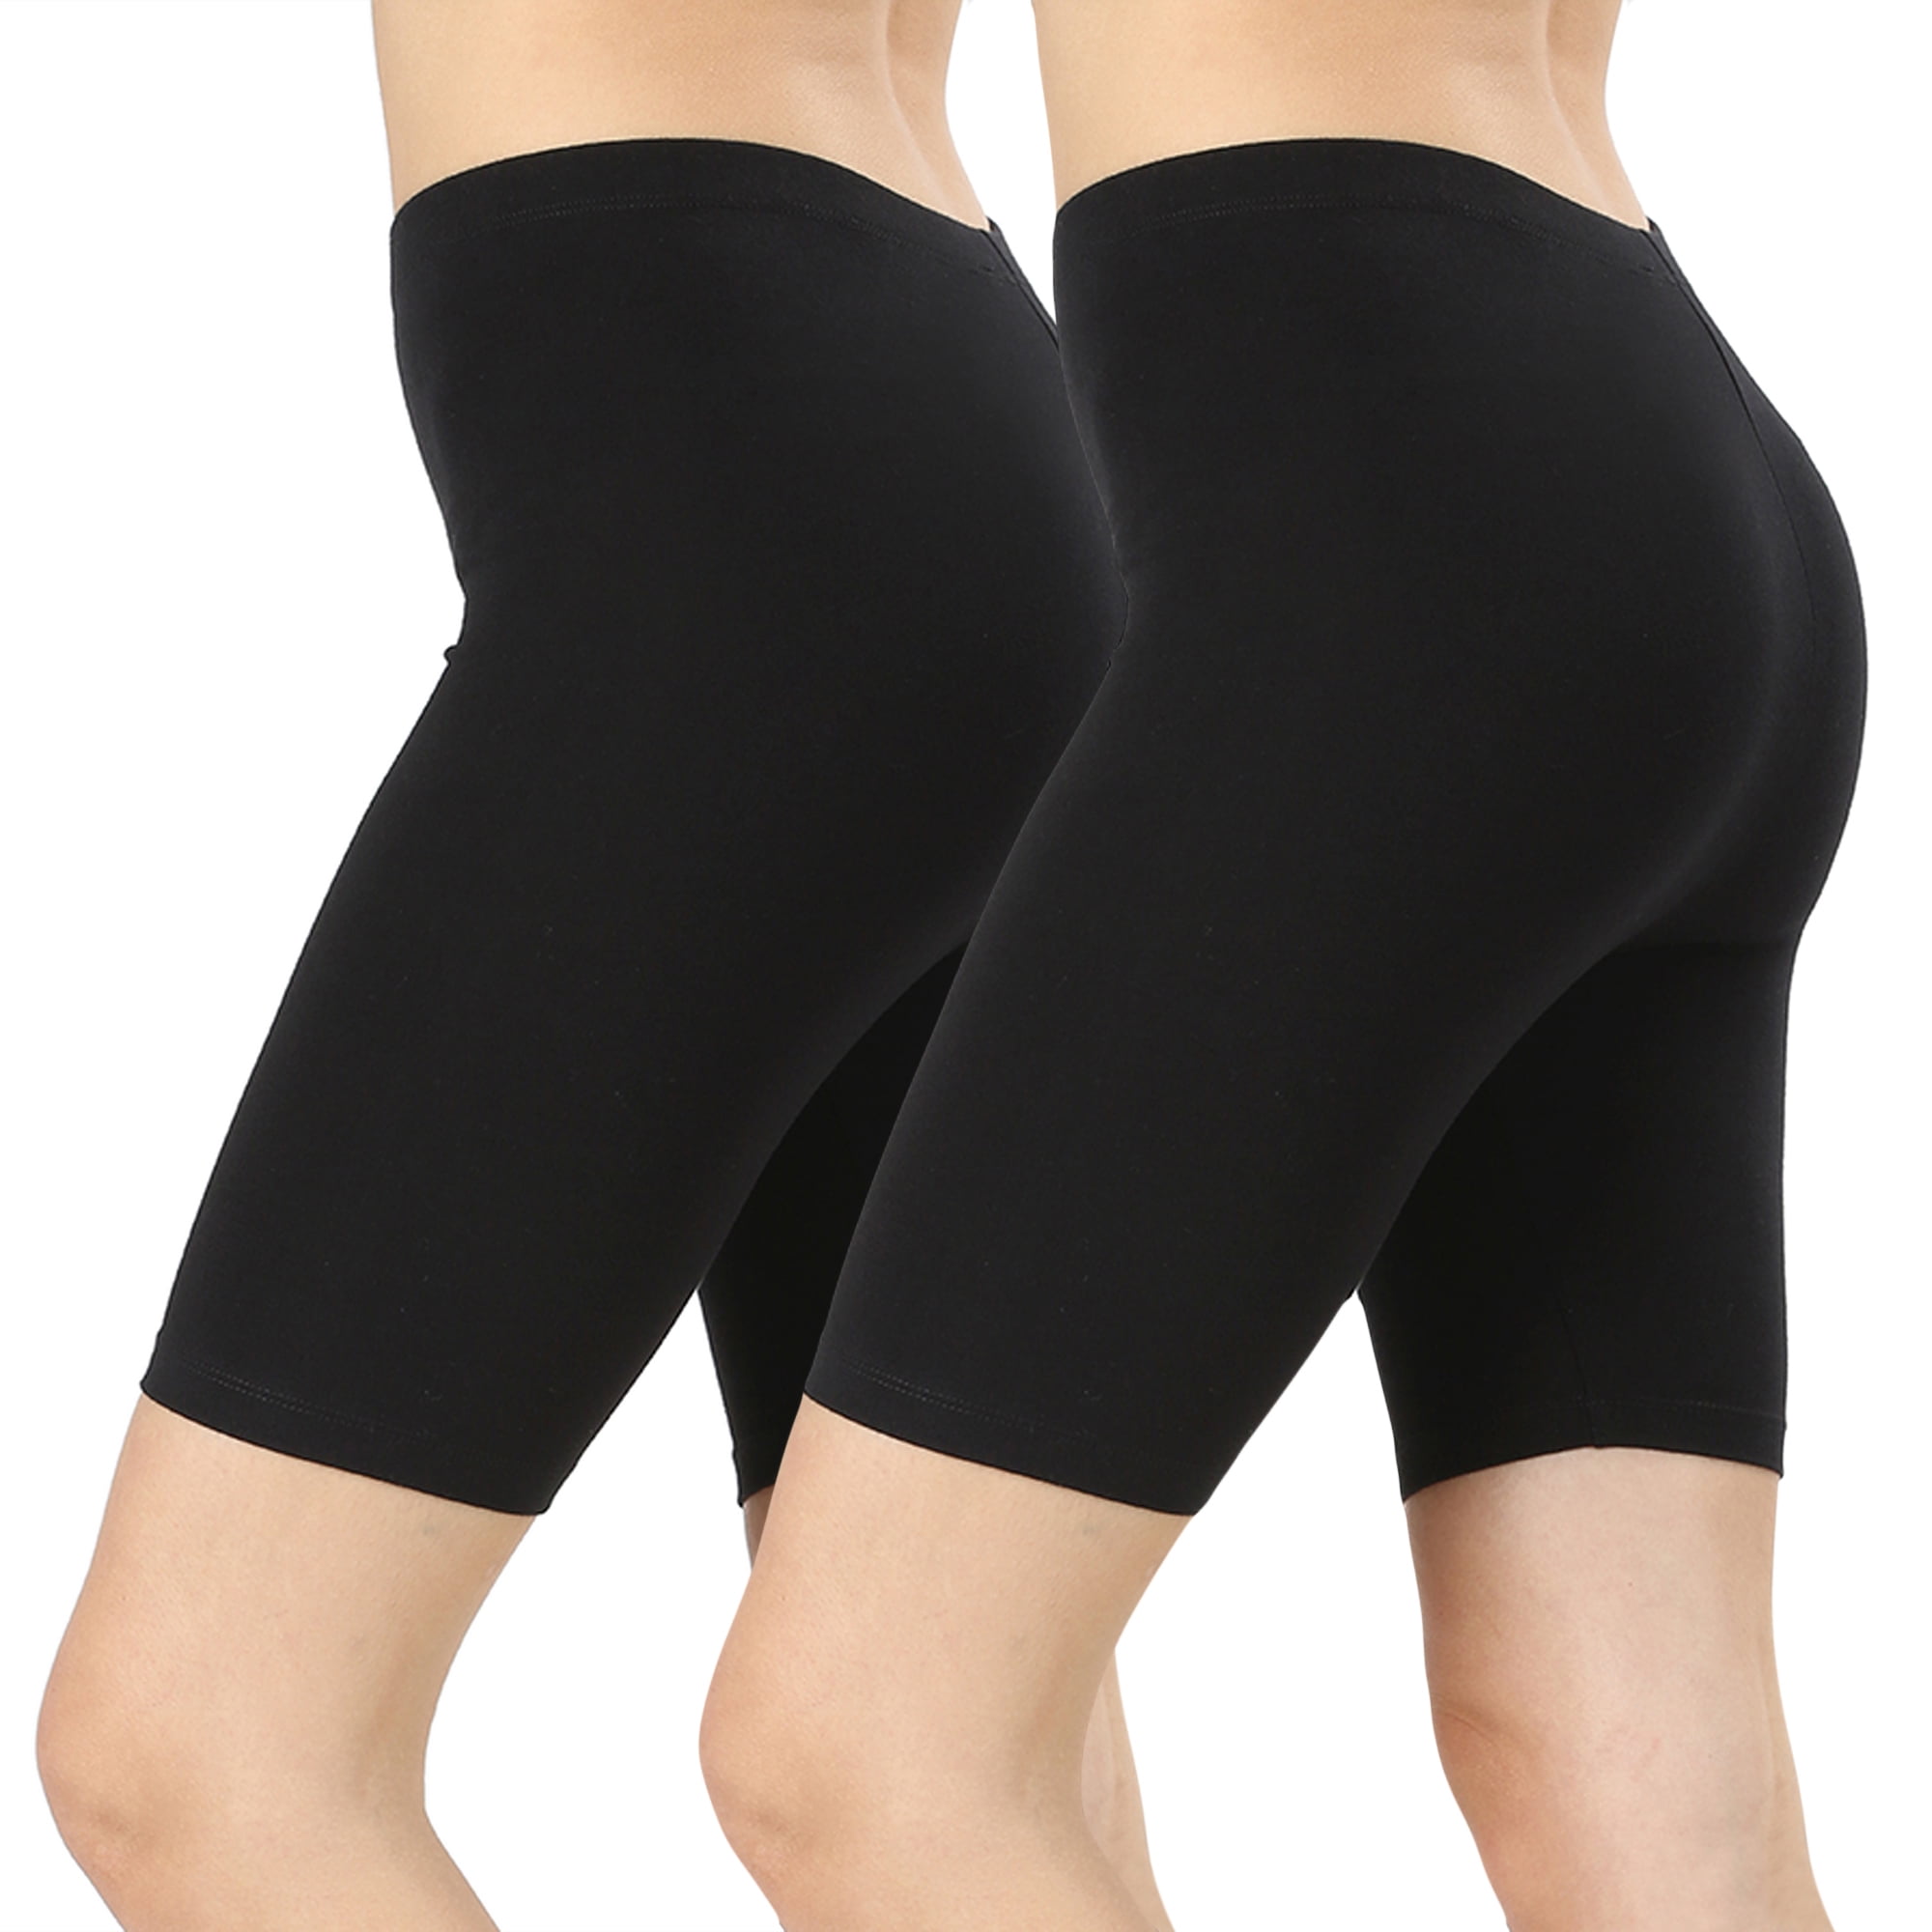 TheLovely 2 Packs of Womens & Plus Soft Cotton Stretch Knee India